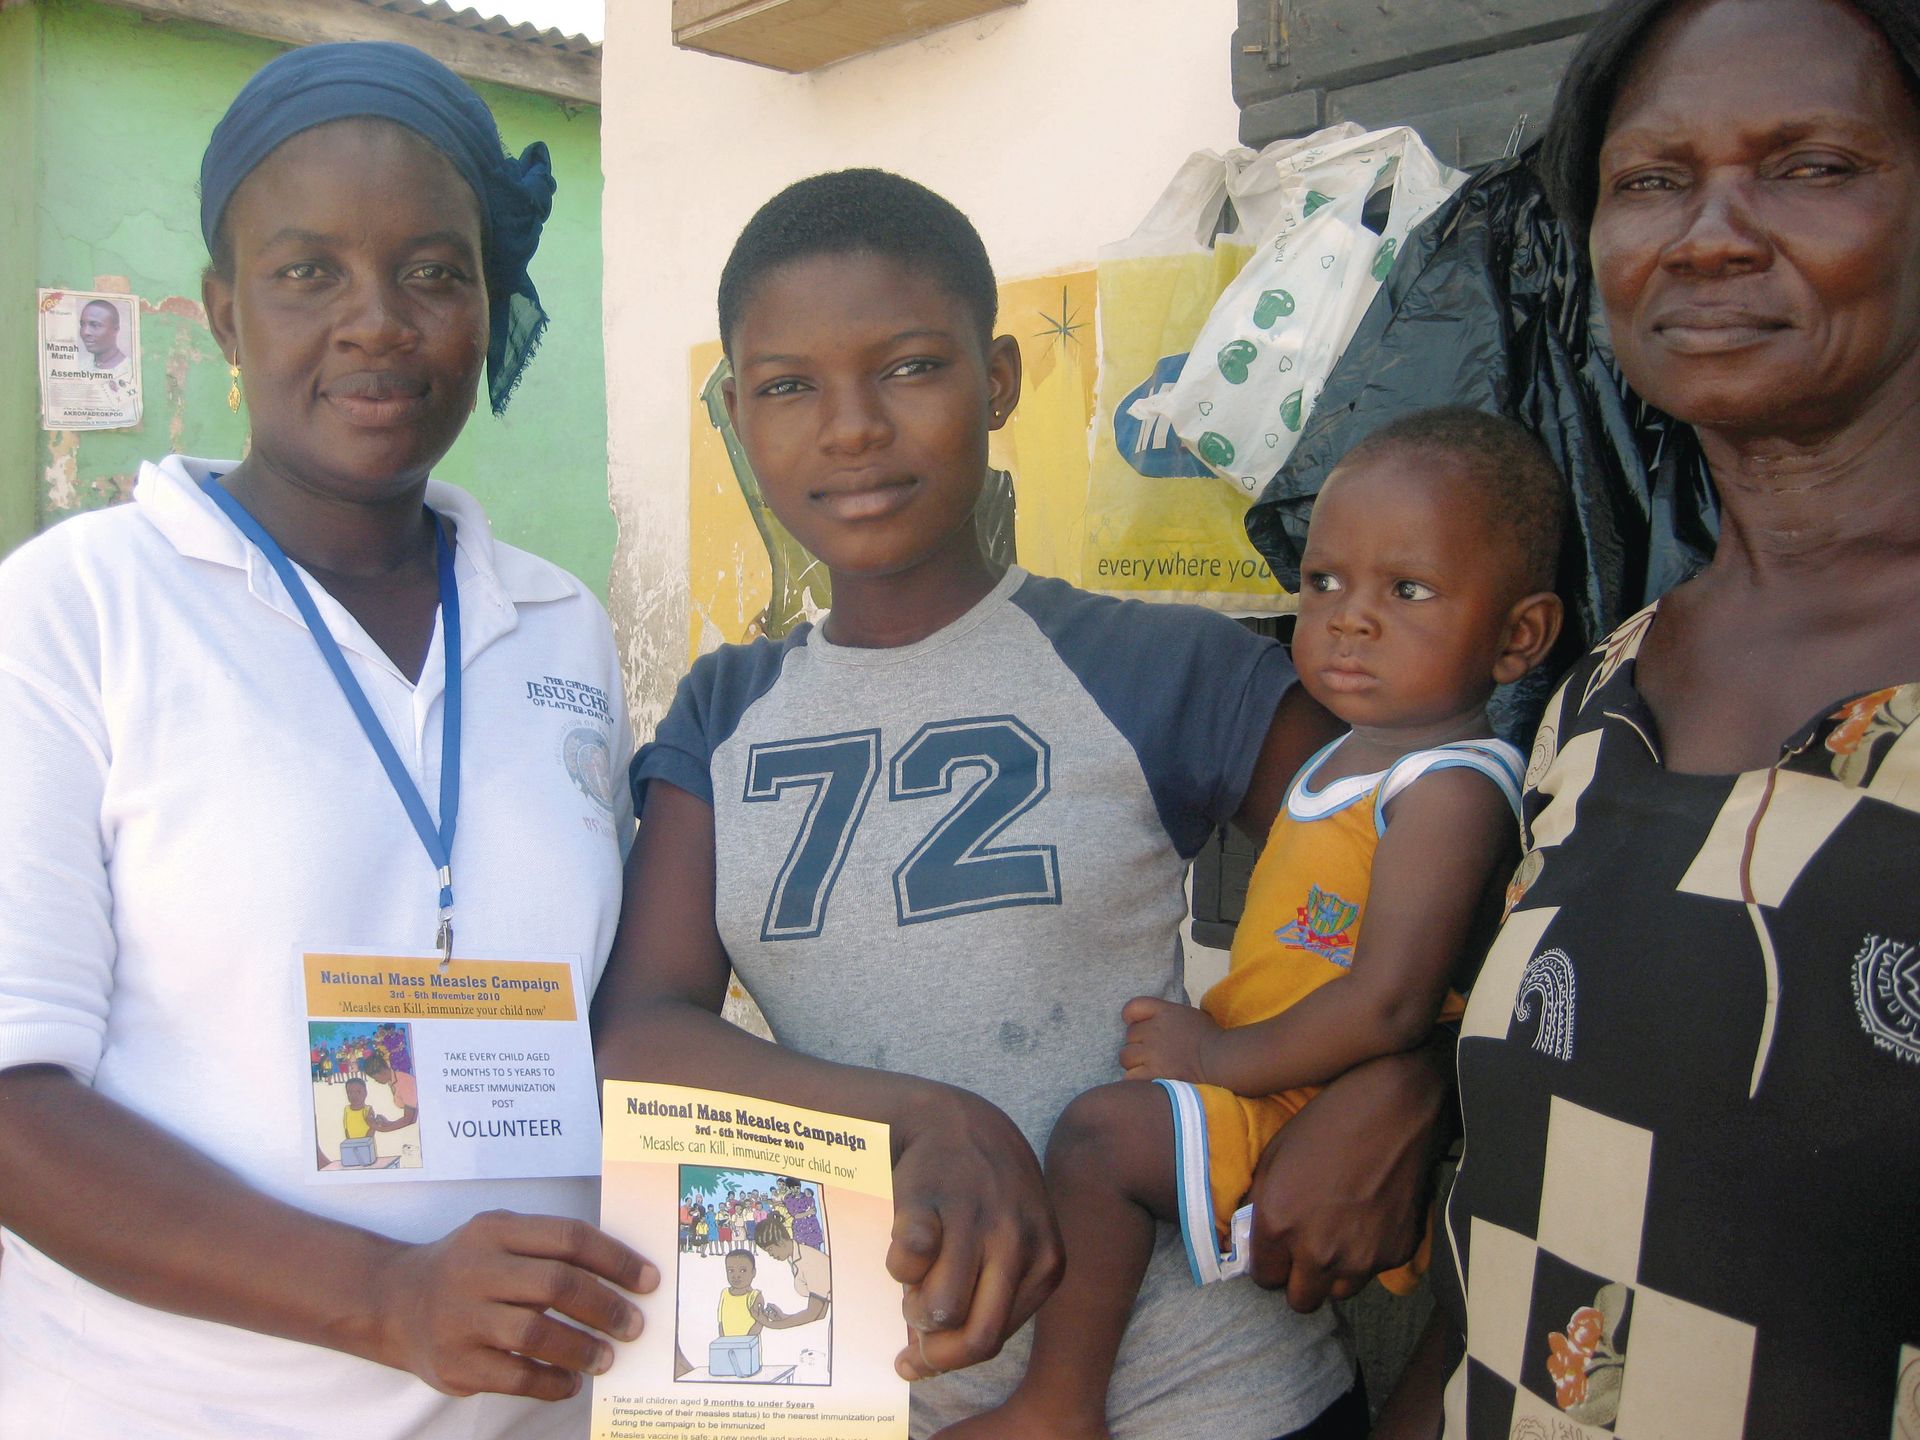 A woman in Africa holding a measles campaign flier and standing near another woman, young woman, and child.